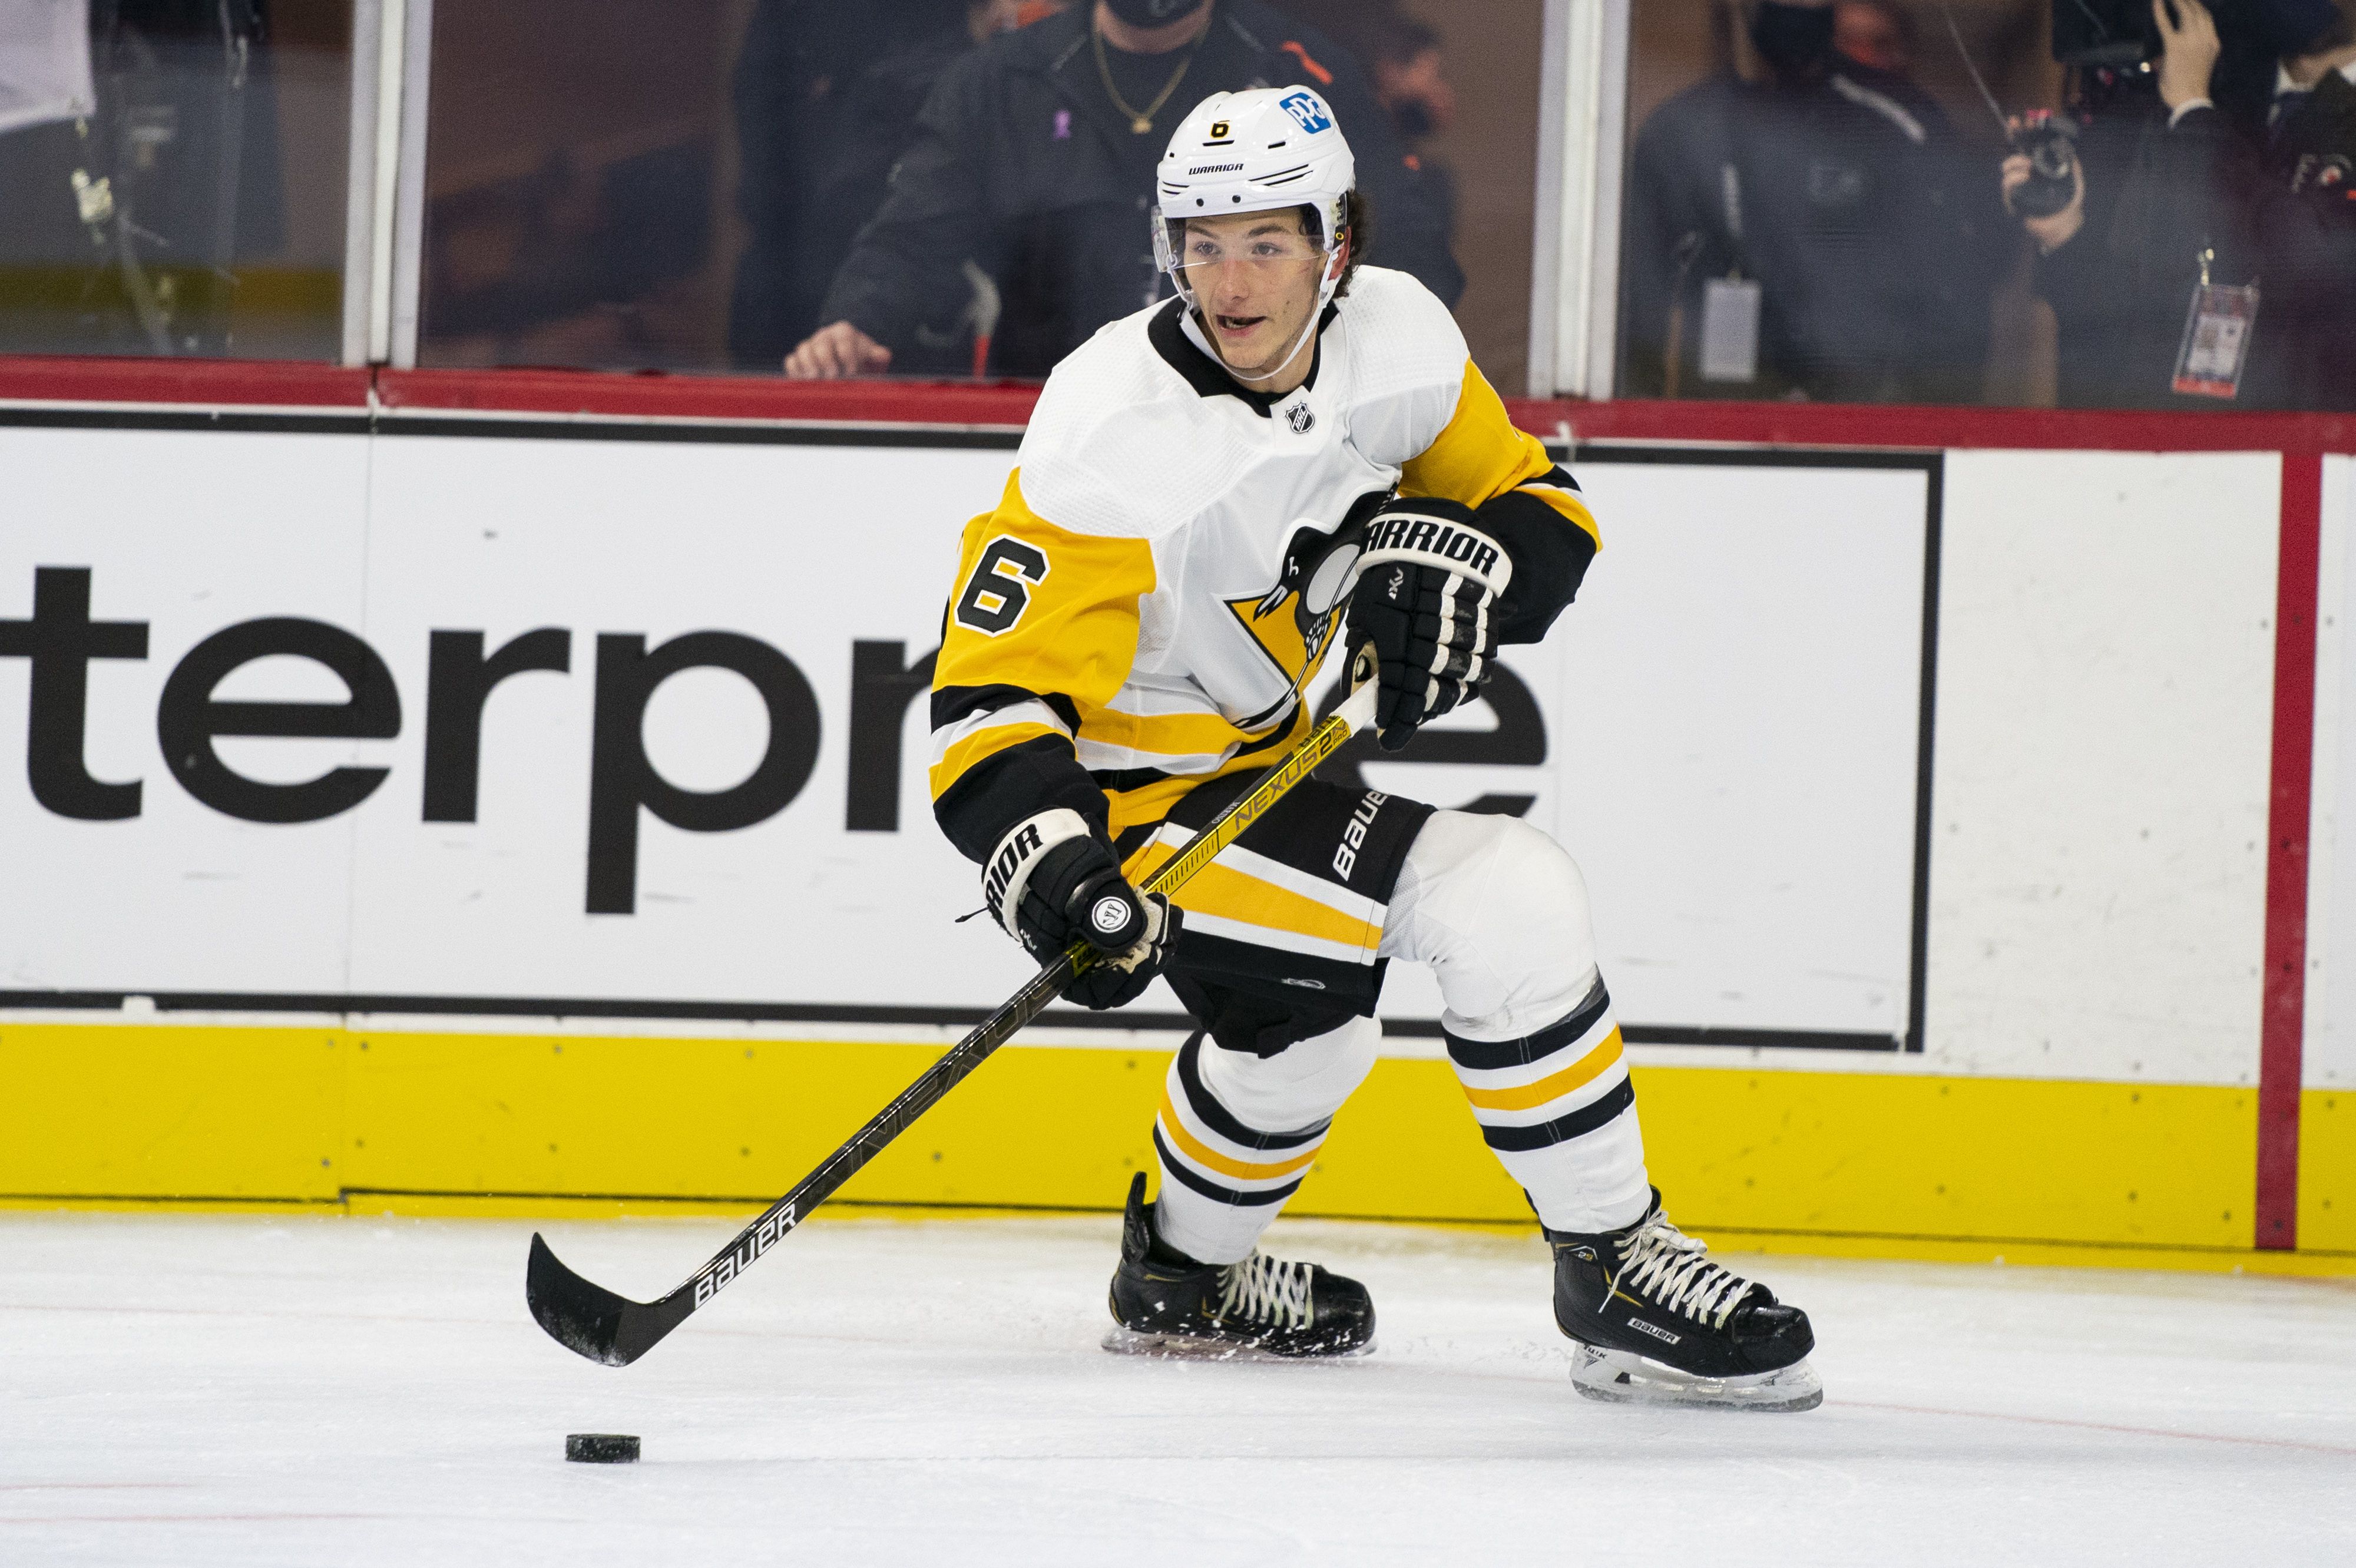 Player photos for the 2020-21 Pittsburgh Penguins at